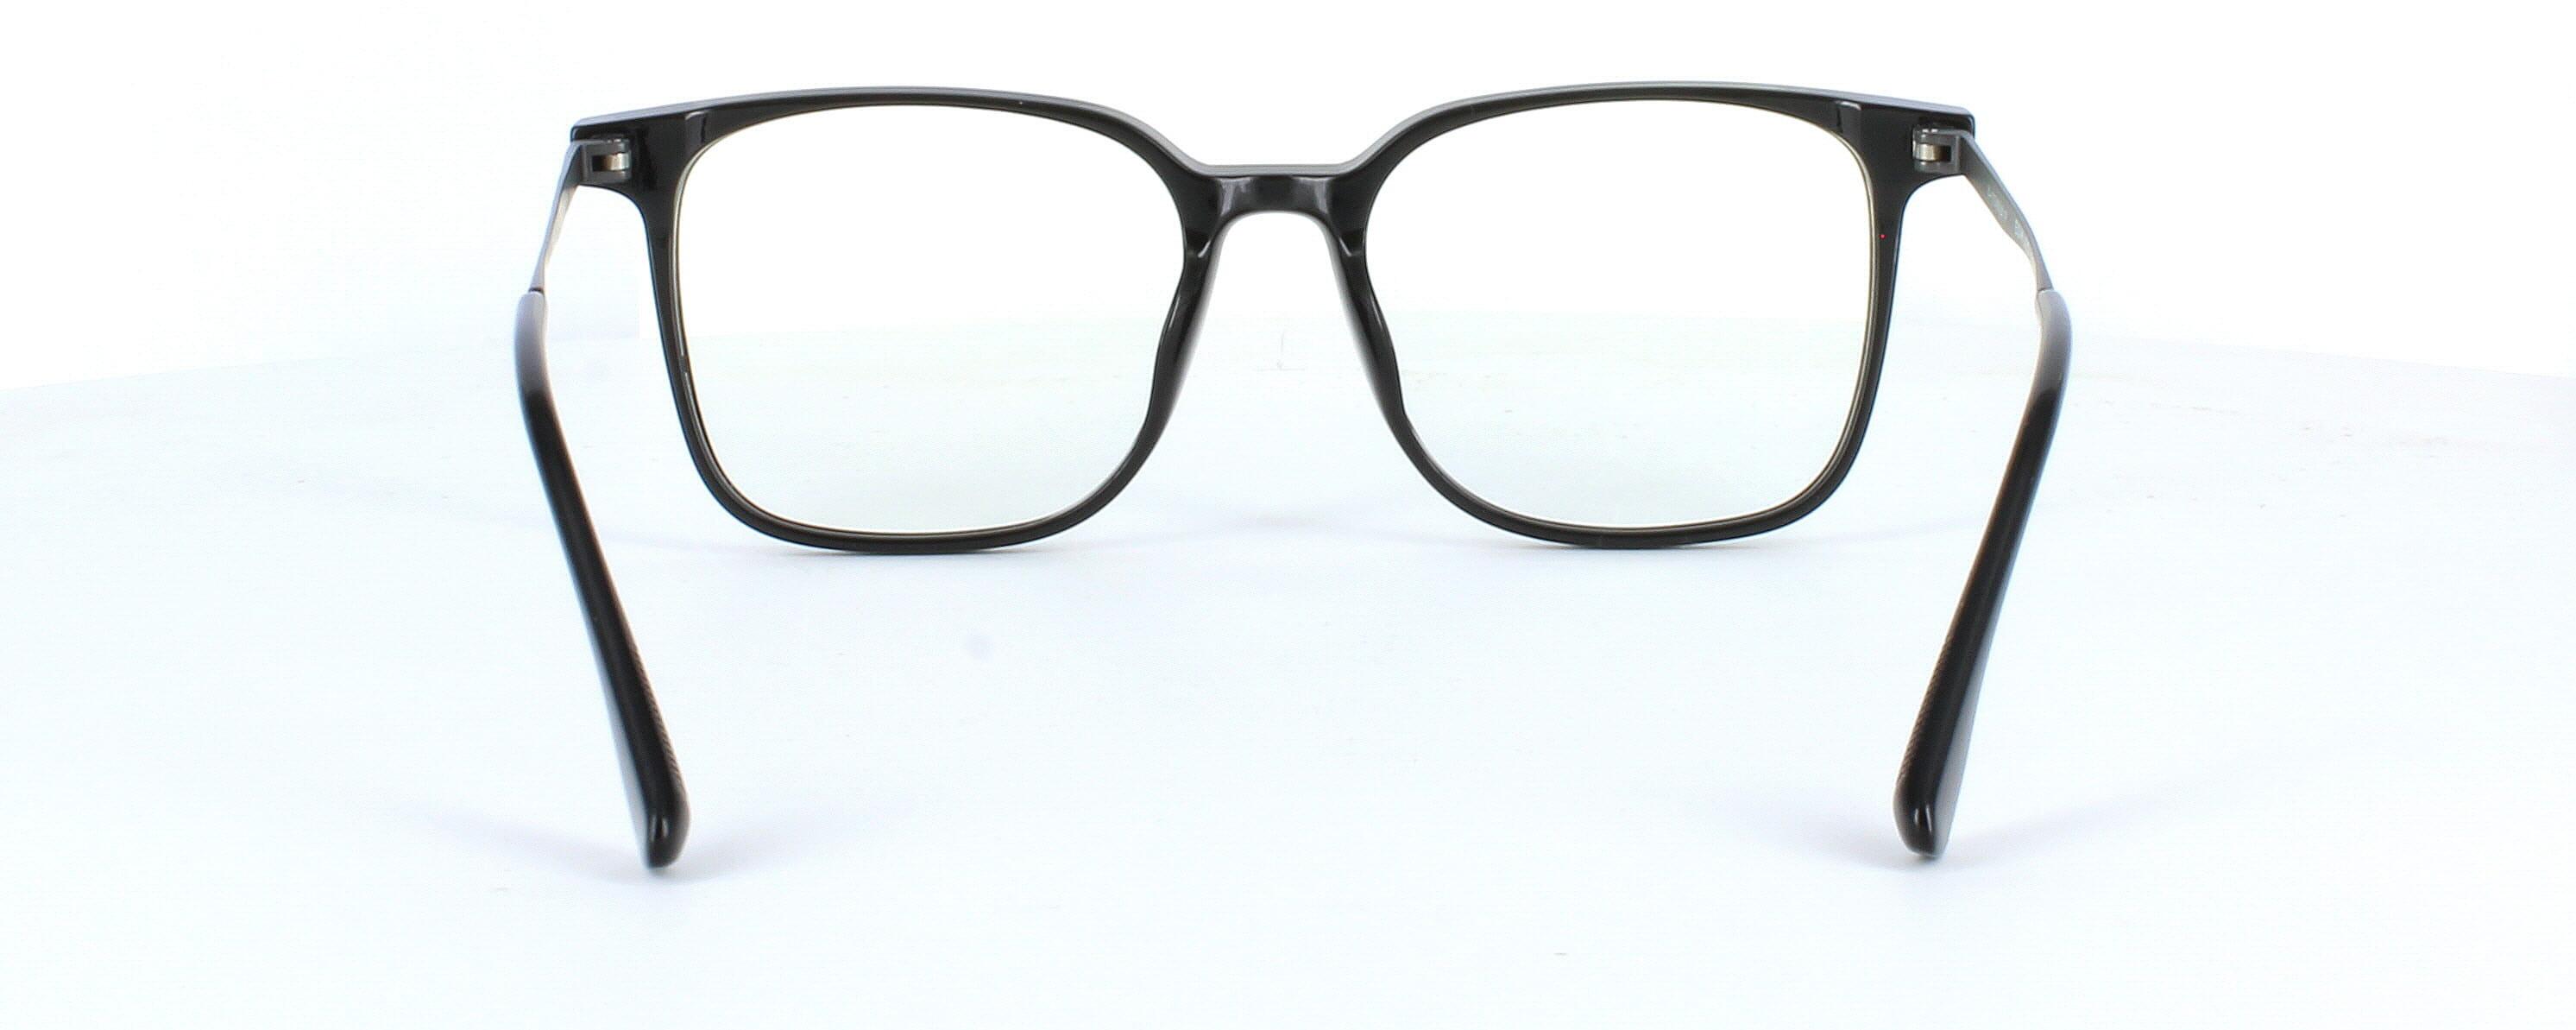 Edward Scotts ST6204 - Black - Gent's acetate retro style glasses frame with square shaped lenses and titanium arms - image view 4